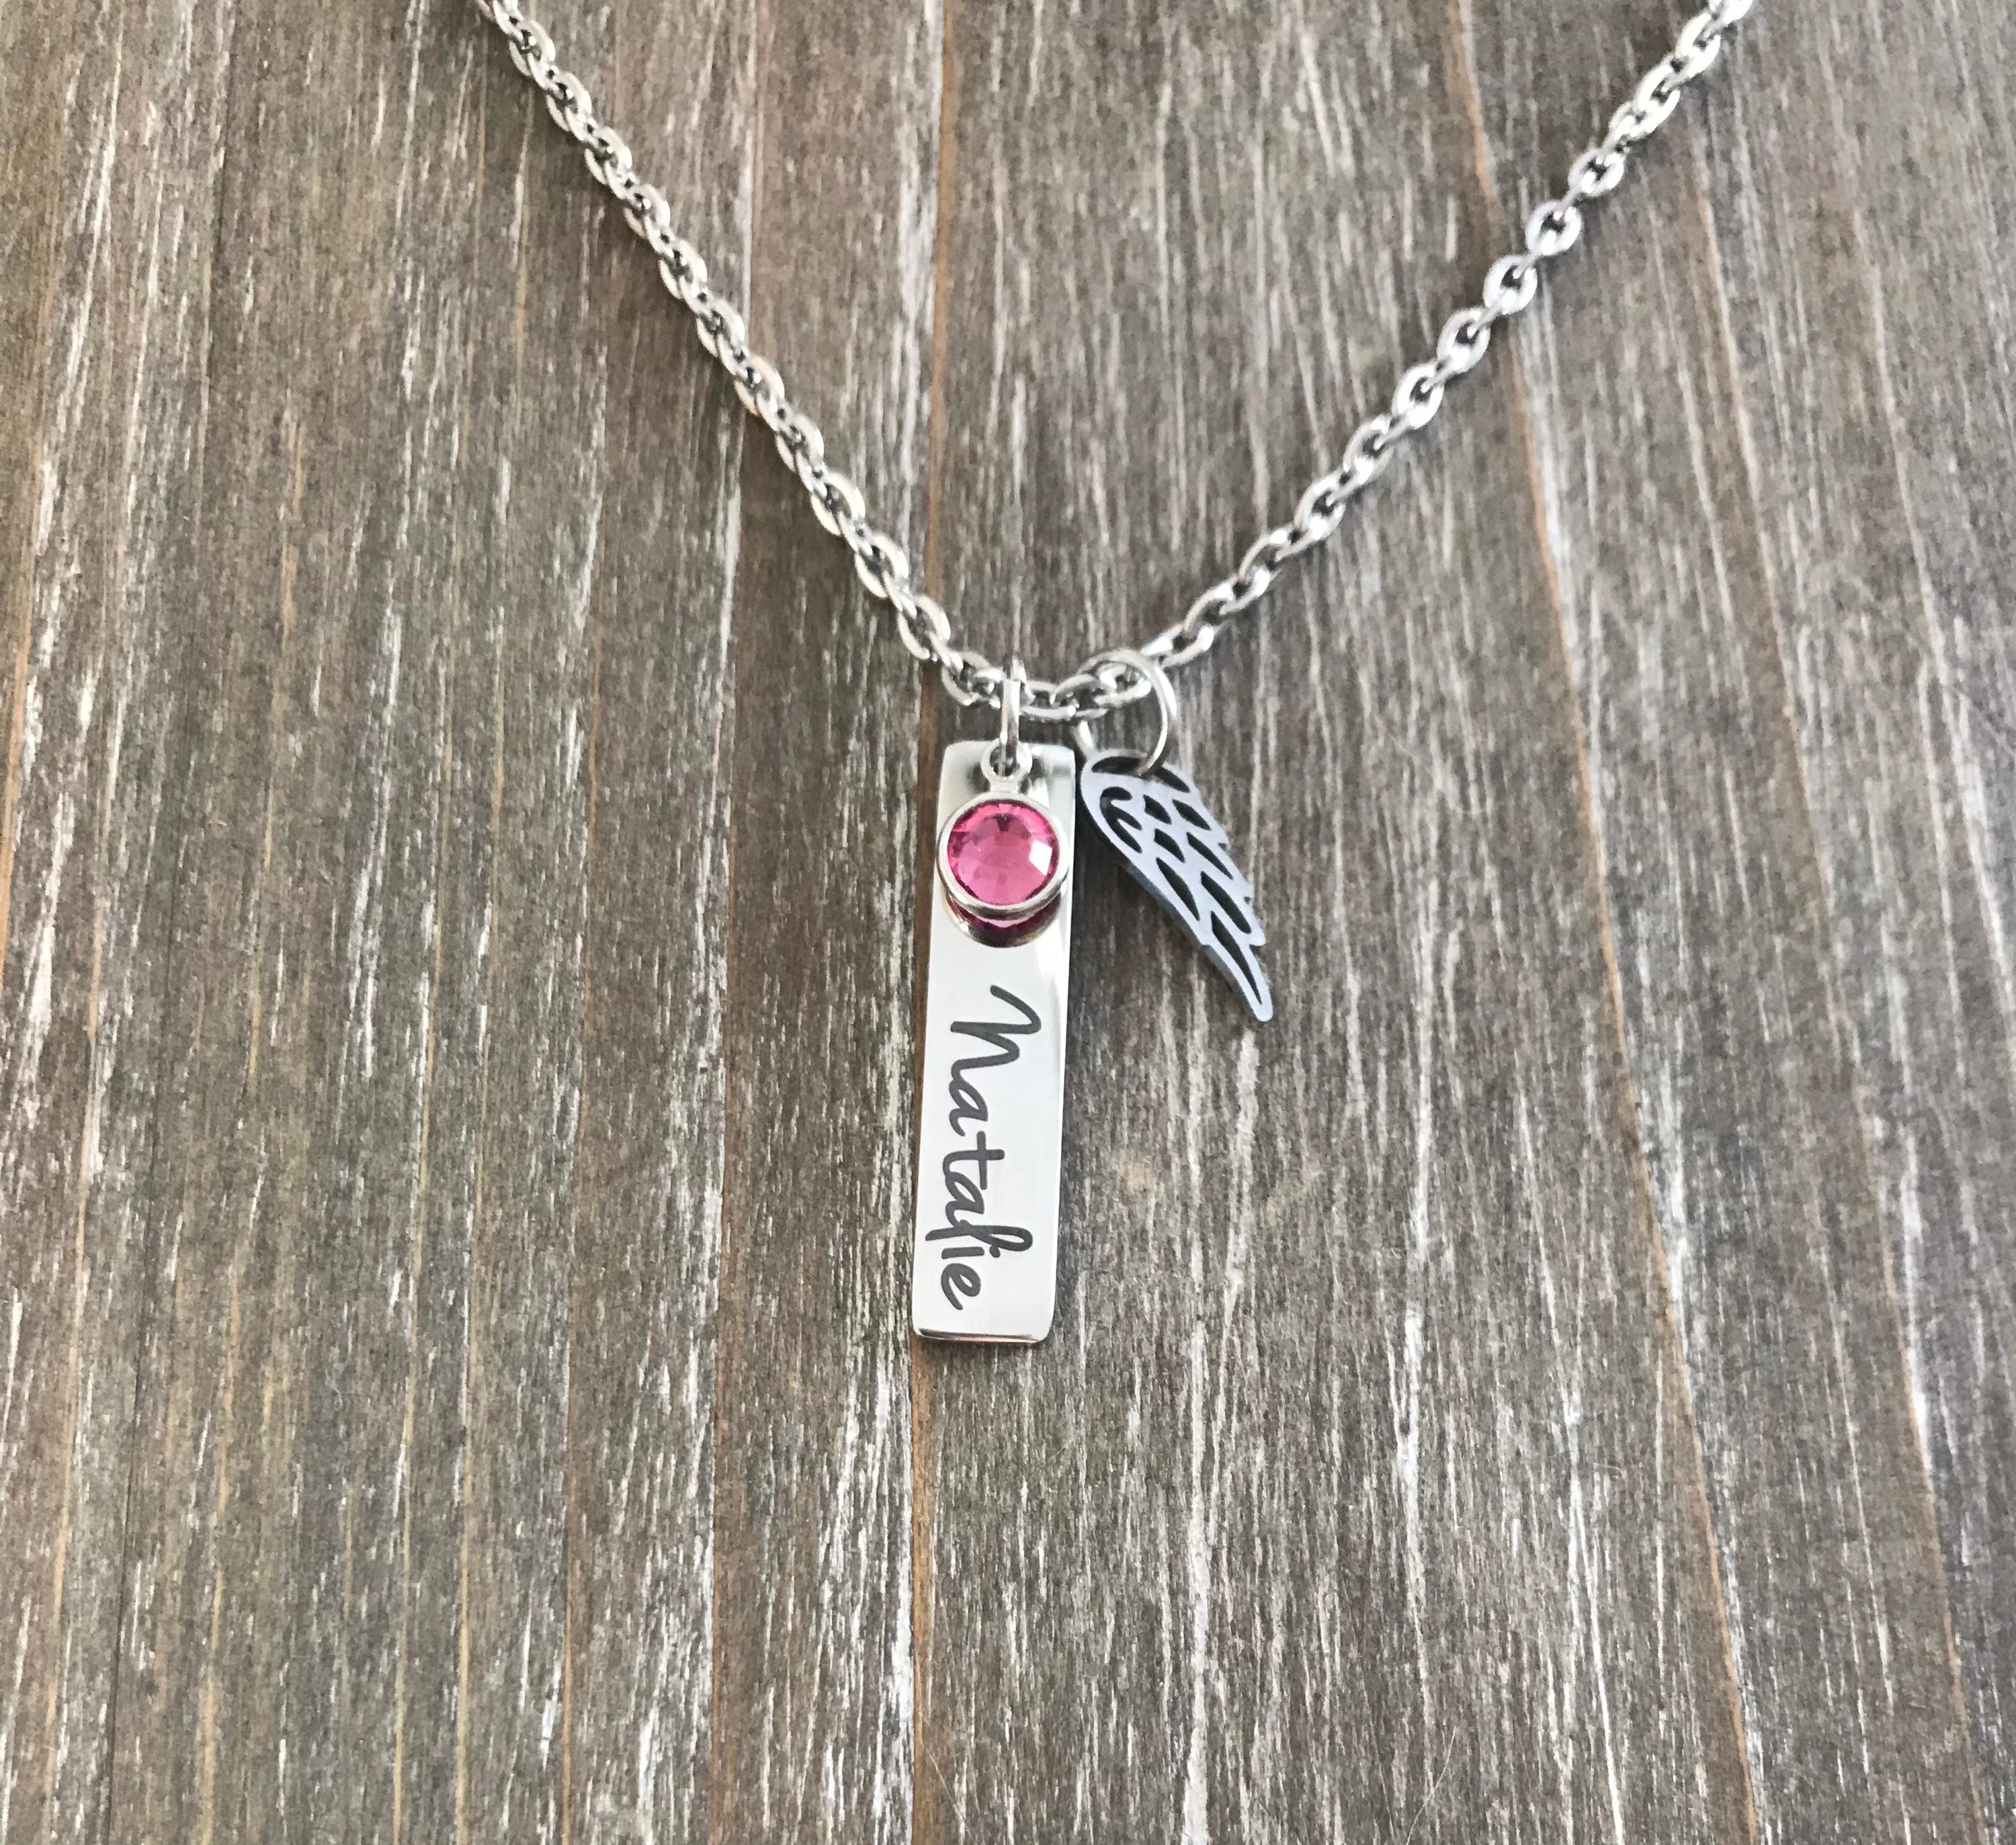 Memorial Necklace, Personalized Photo Pendant, Memory Jewelry, Signature  Pendant With Engraving - Etsy | Remembrance jewelry, Photo jewelry,  Cleaning silver jewelry